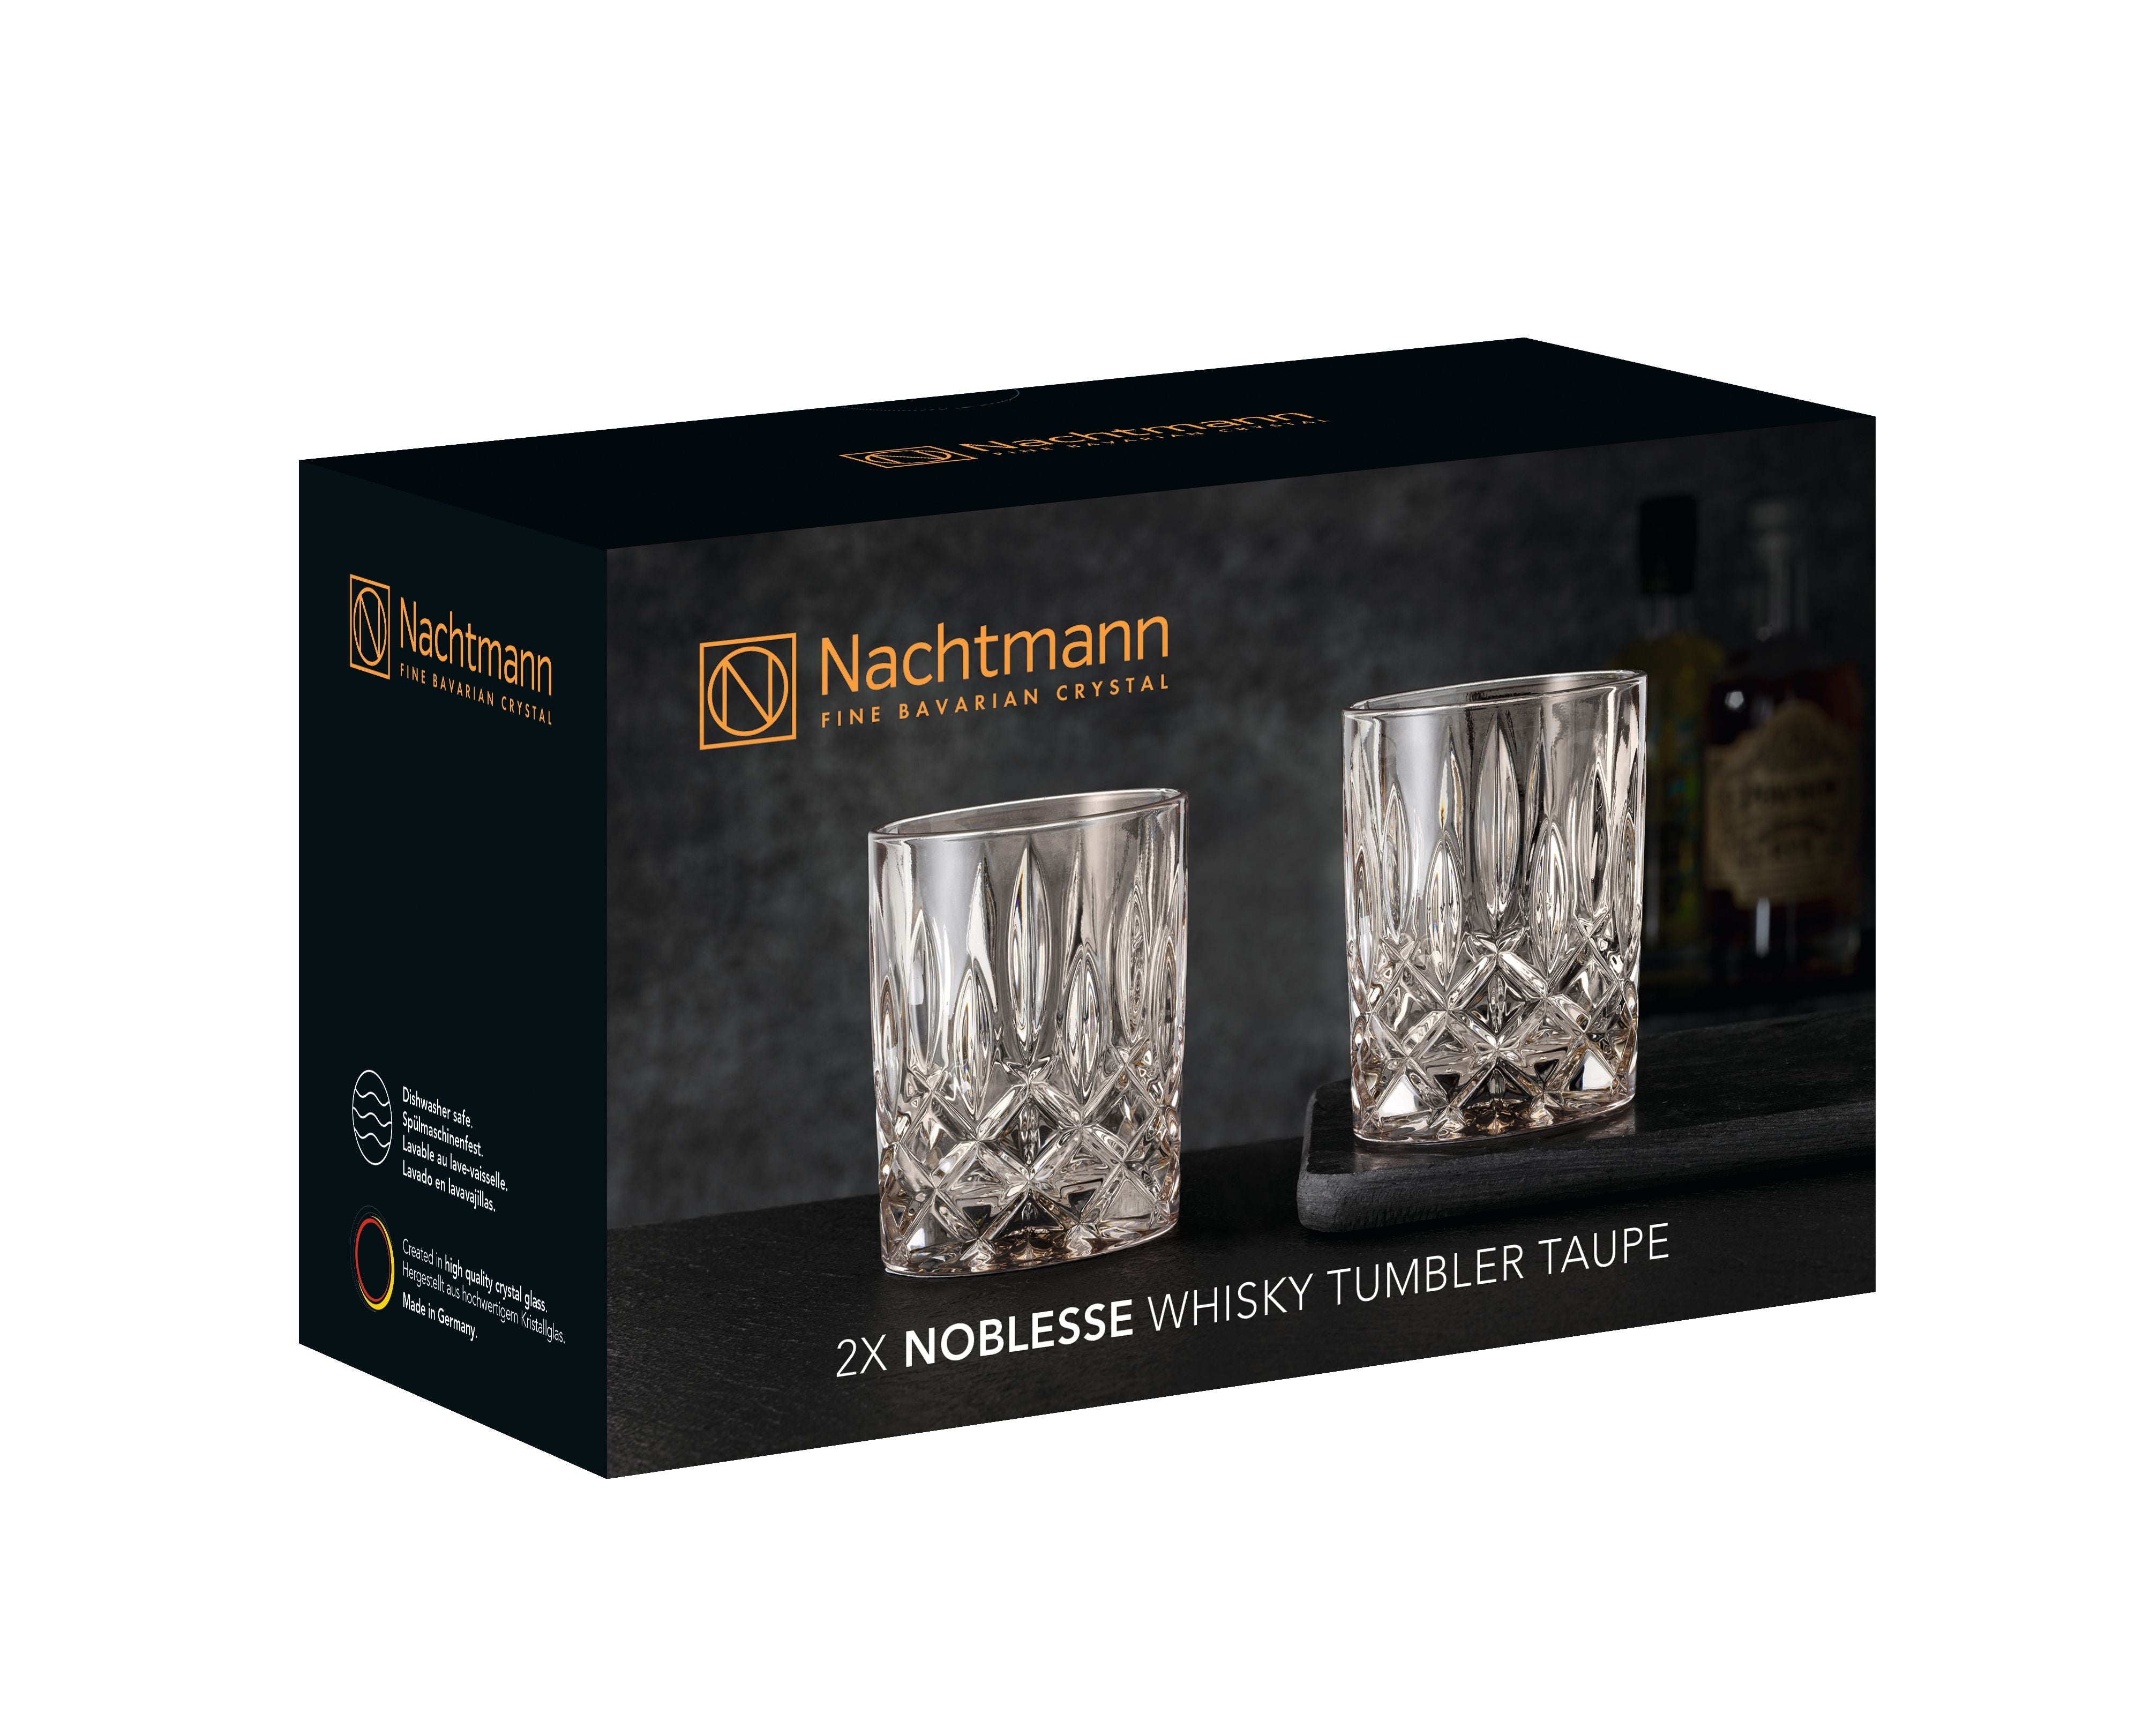 Nachtmann Noblesse Whisky Glass Taupe 295 Ml, Set Of 2